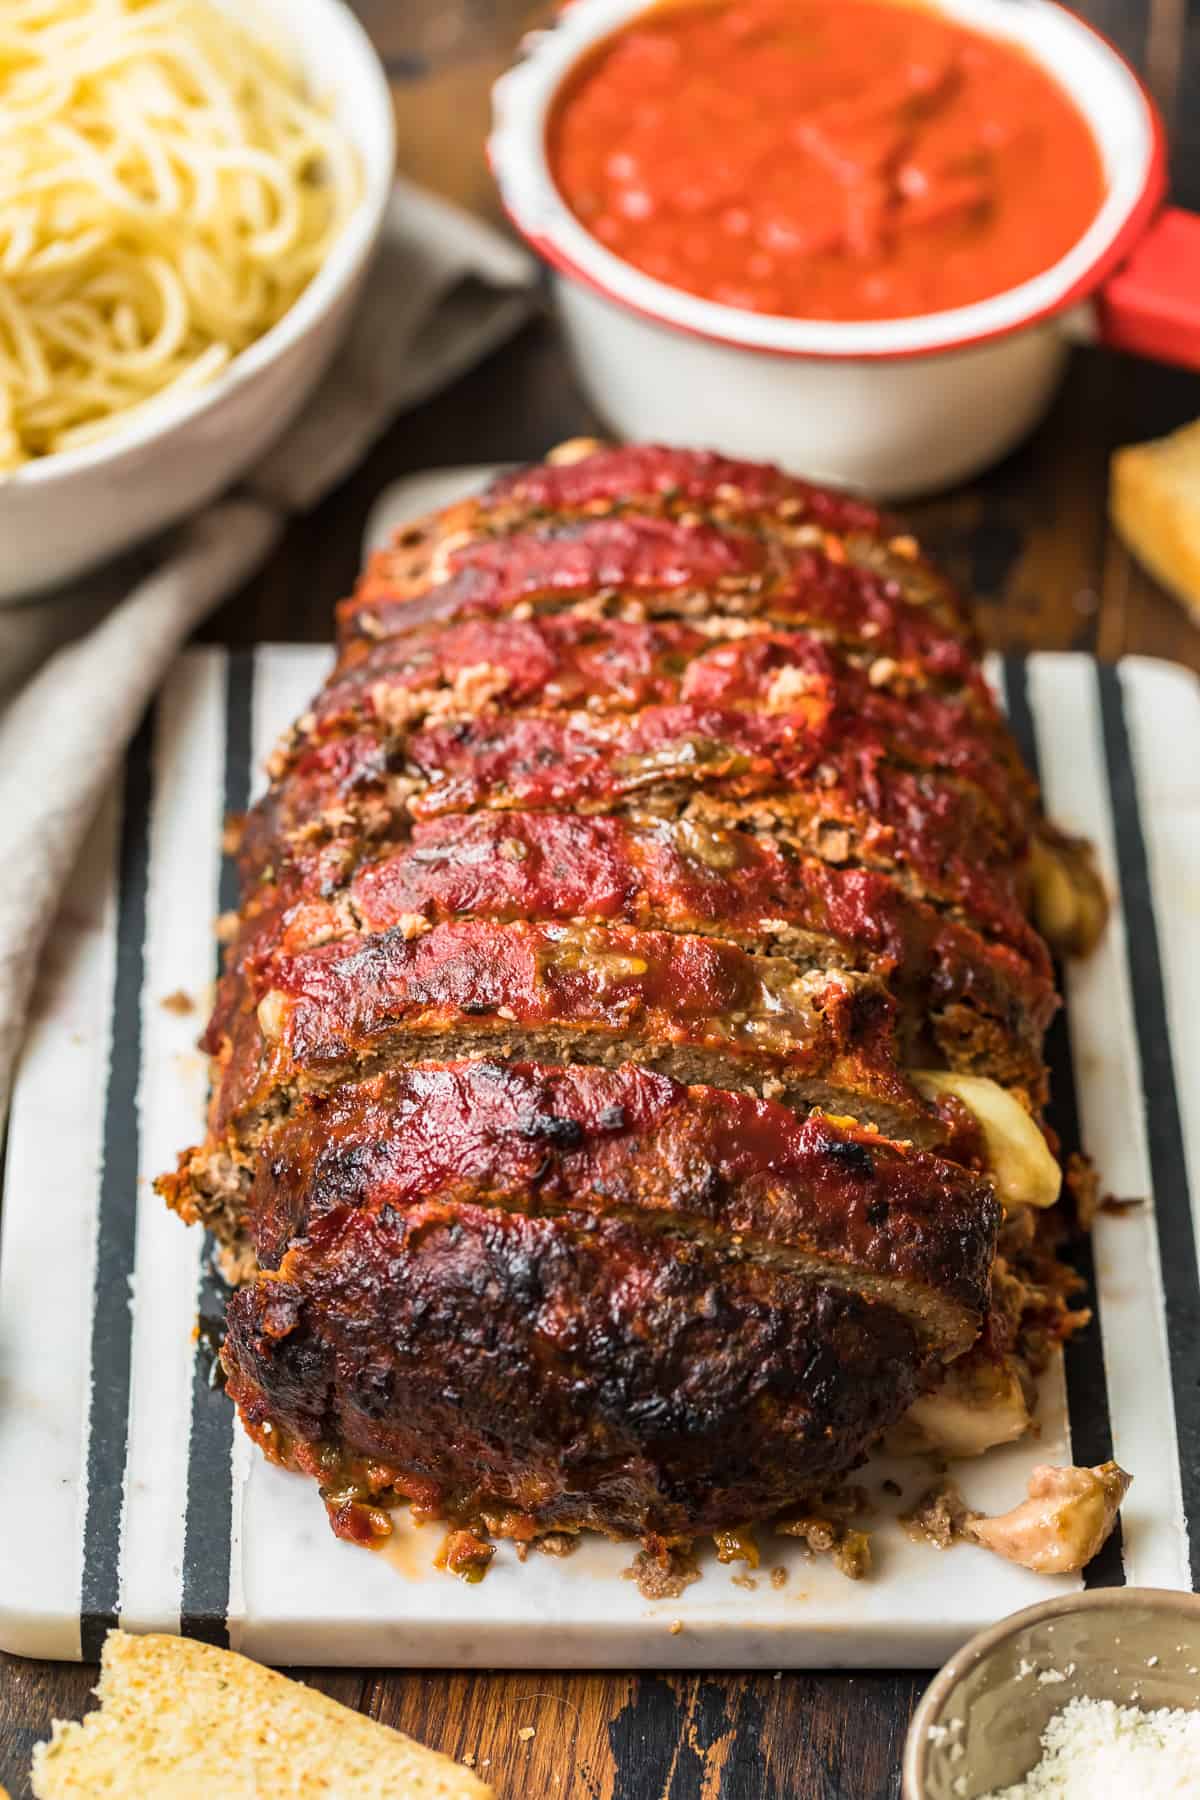 meatloaf on table